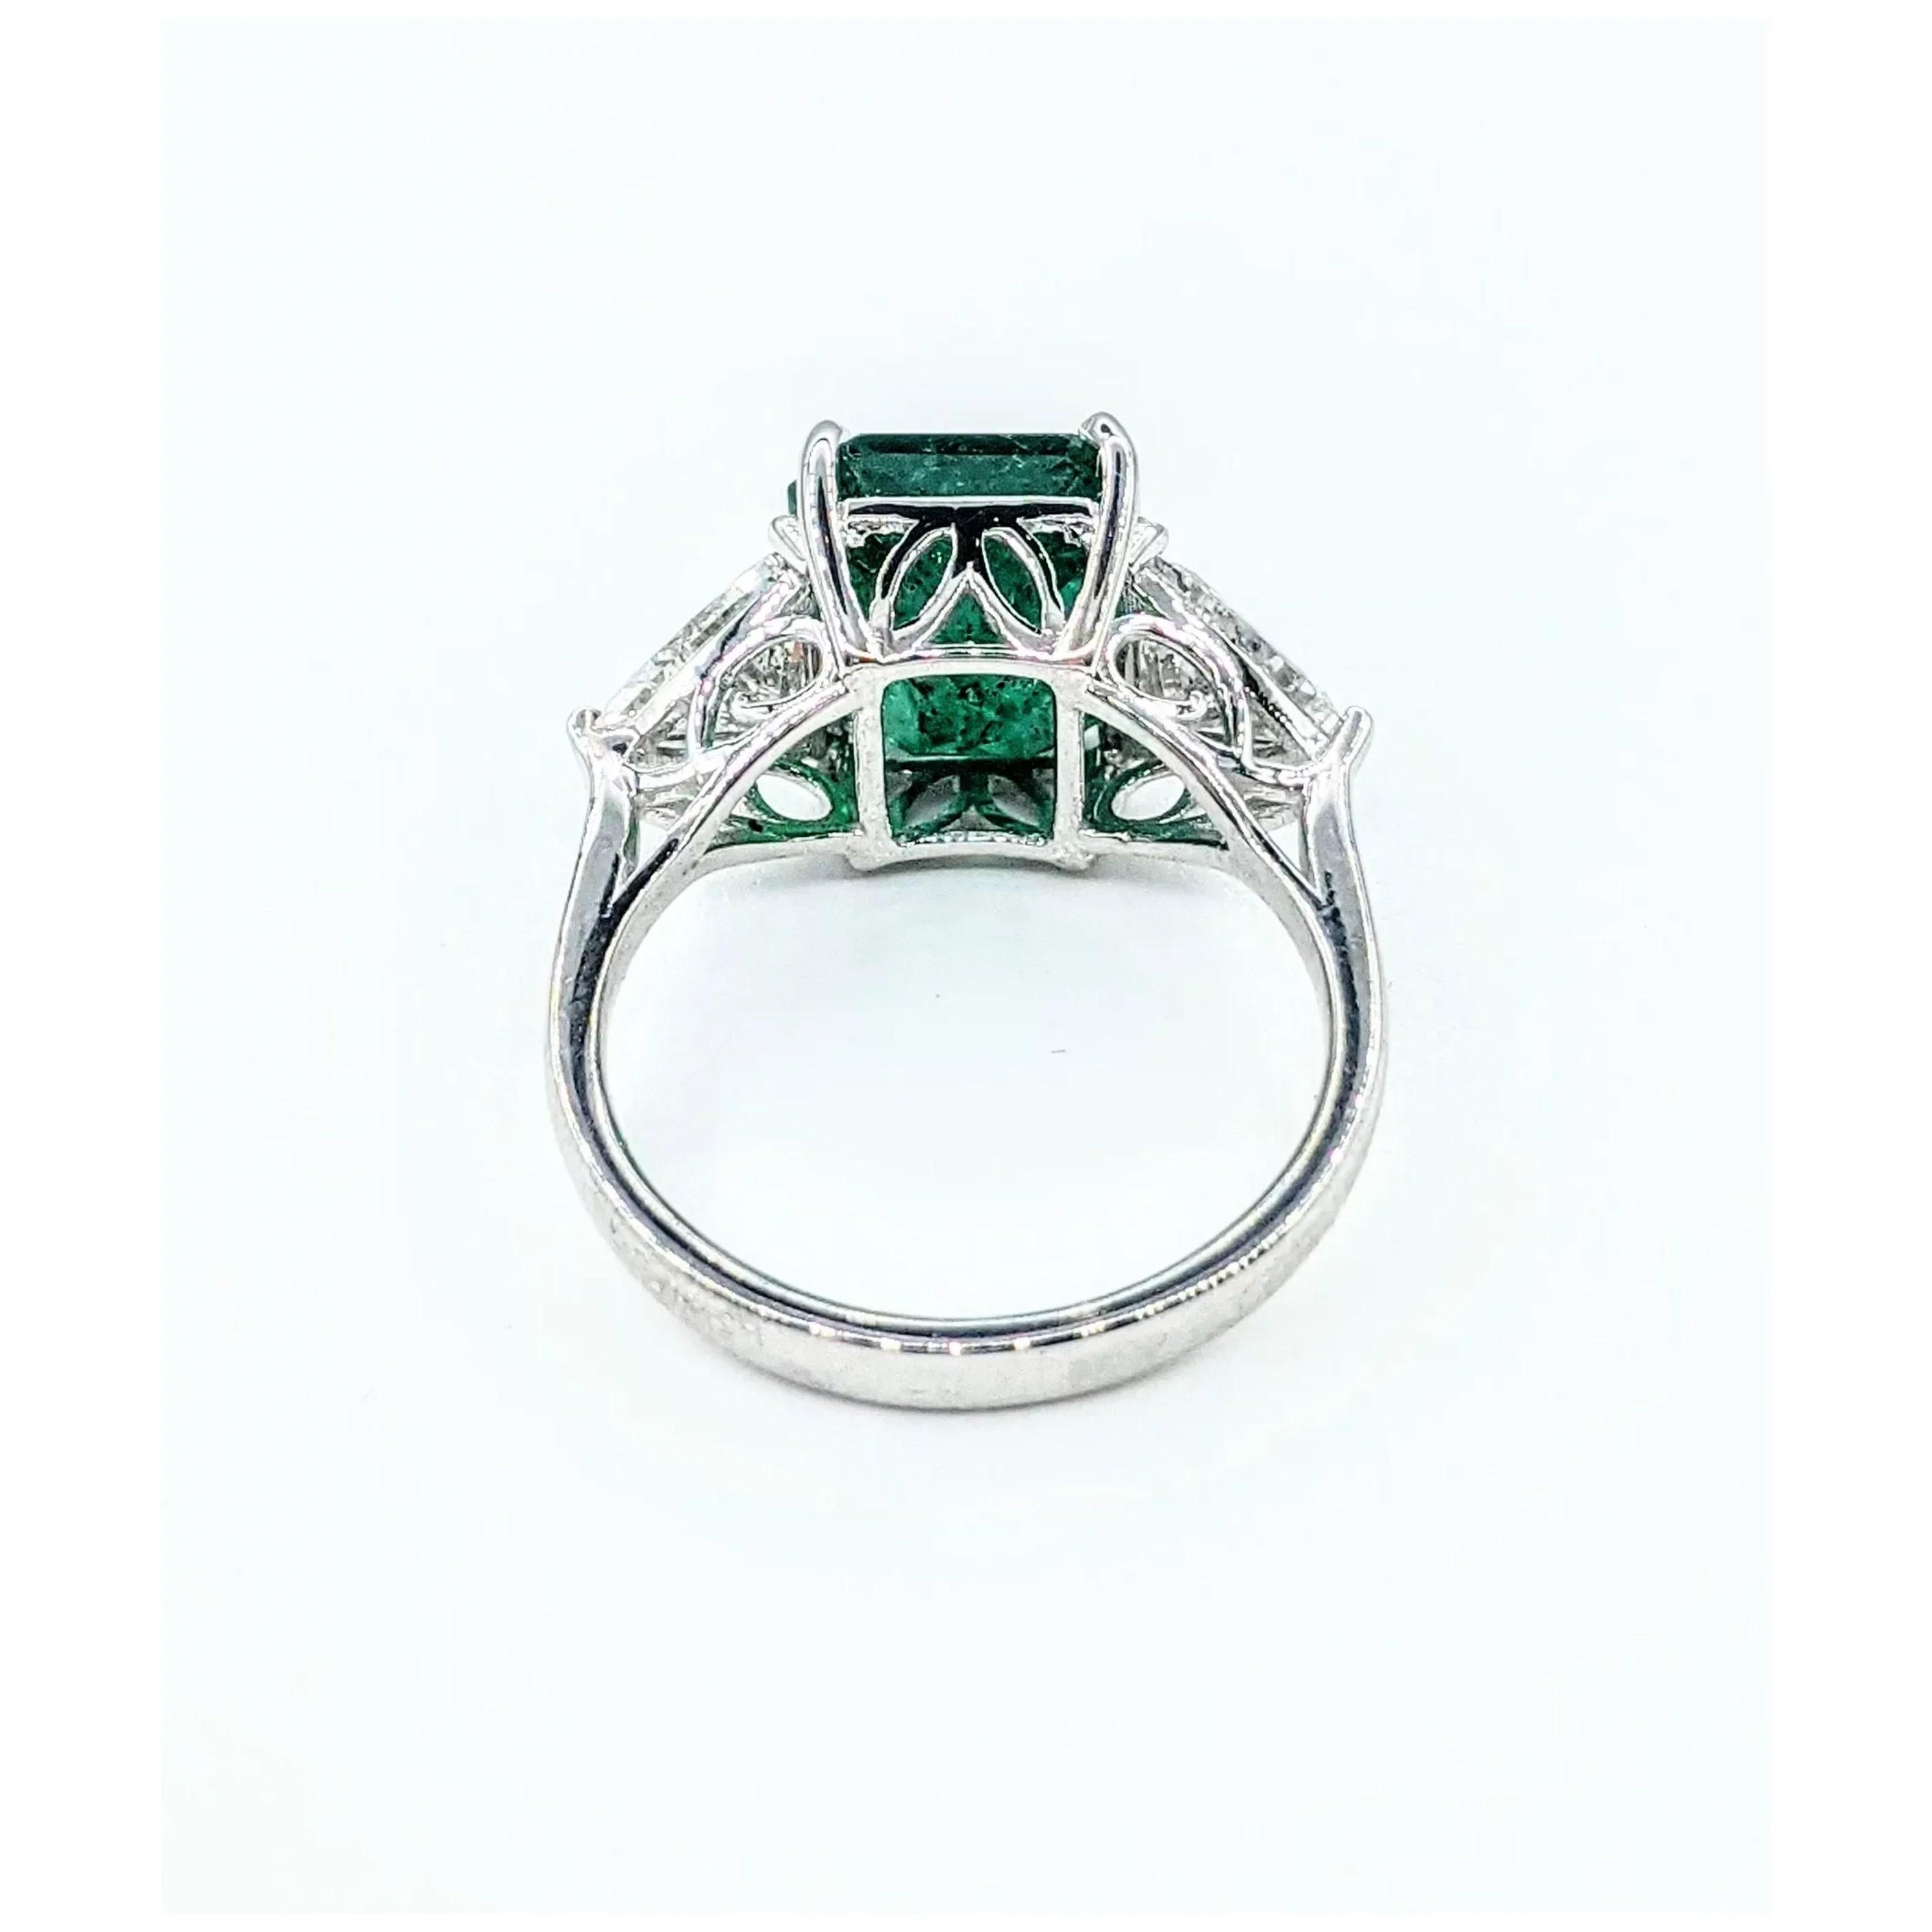 For Sale:  18K Gold 3 CT Natural Emerald and Diamond Antique Art Deco Style Engagement Ring 3